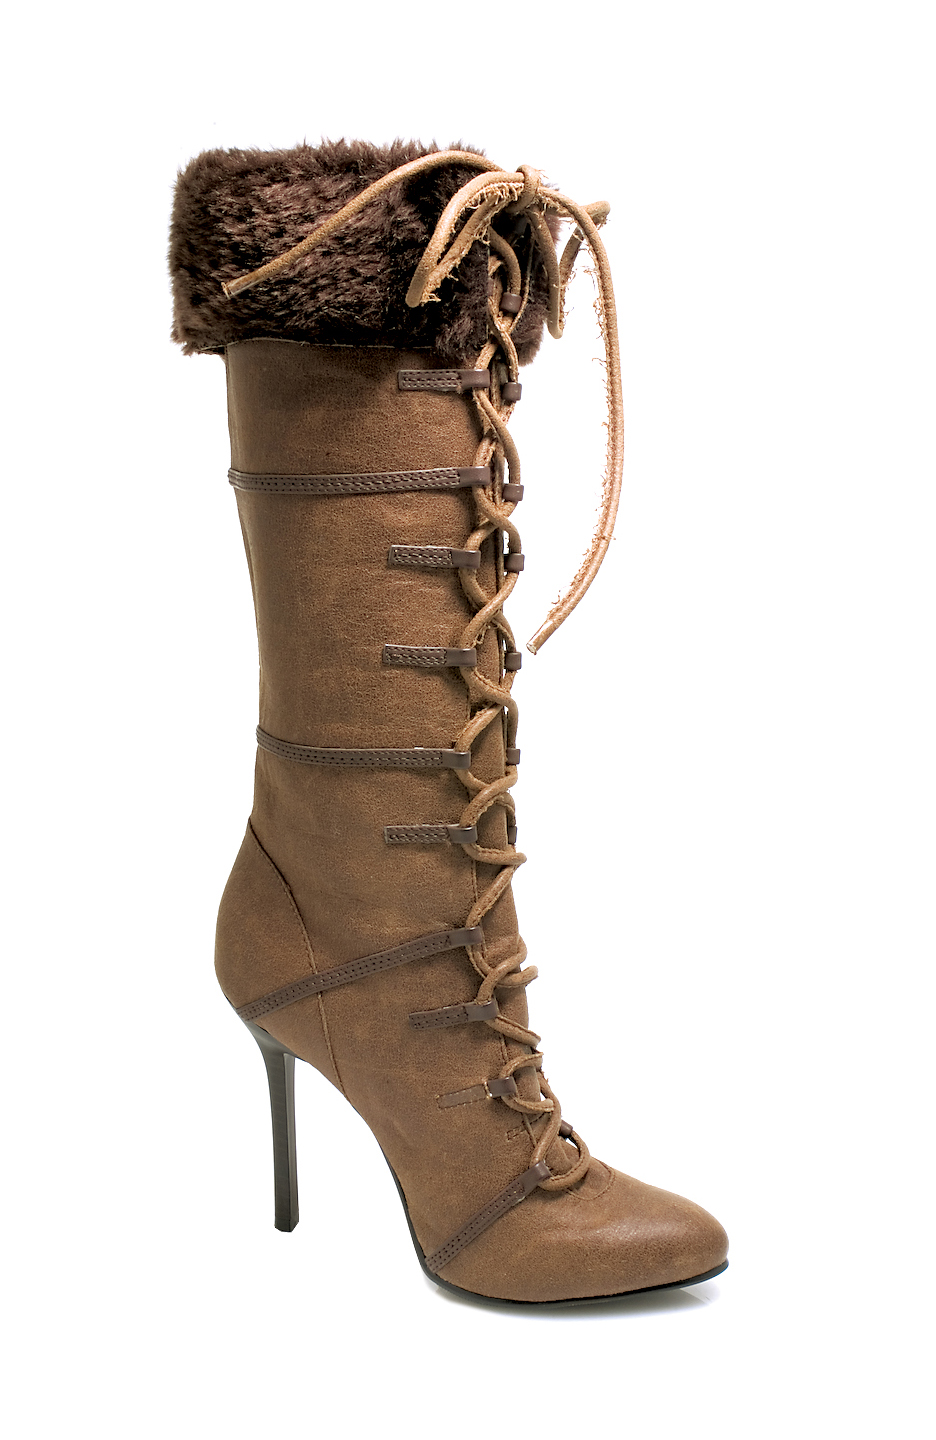 Viking - 4 Inch Heel Fur Top Lace-Up Boots